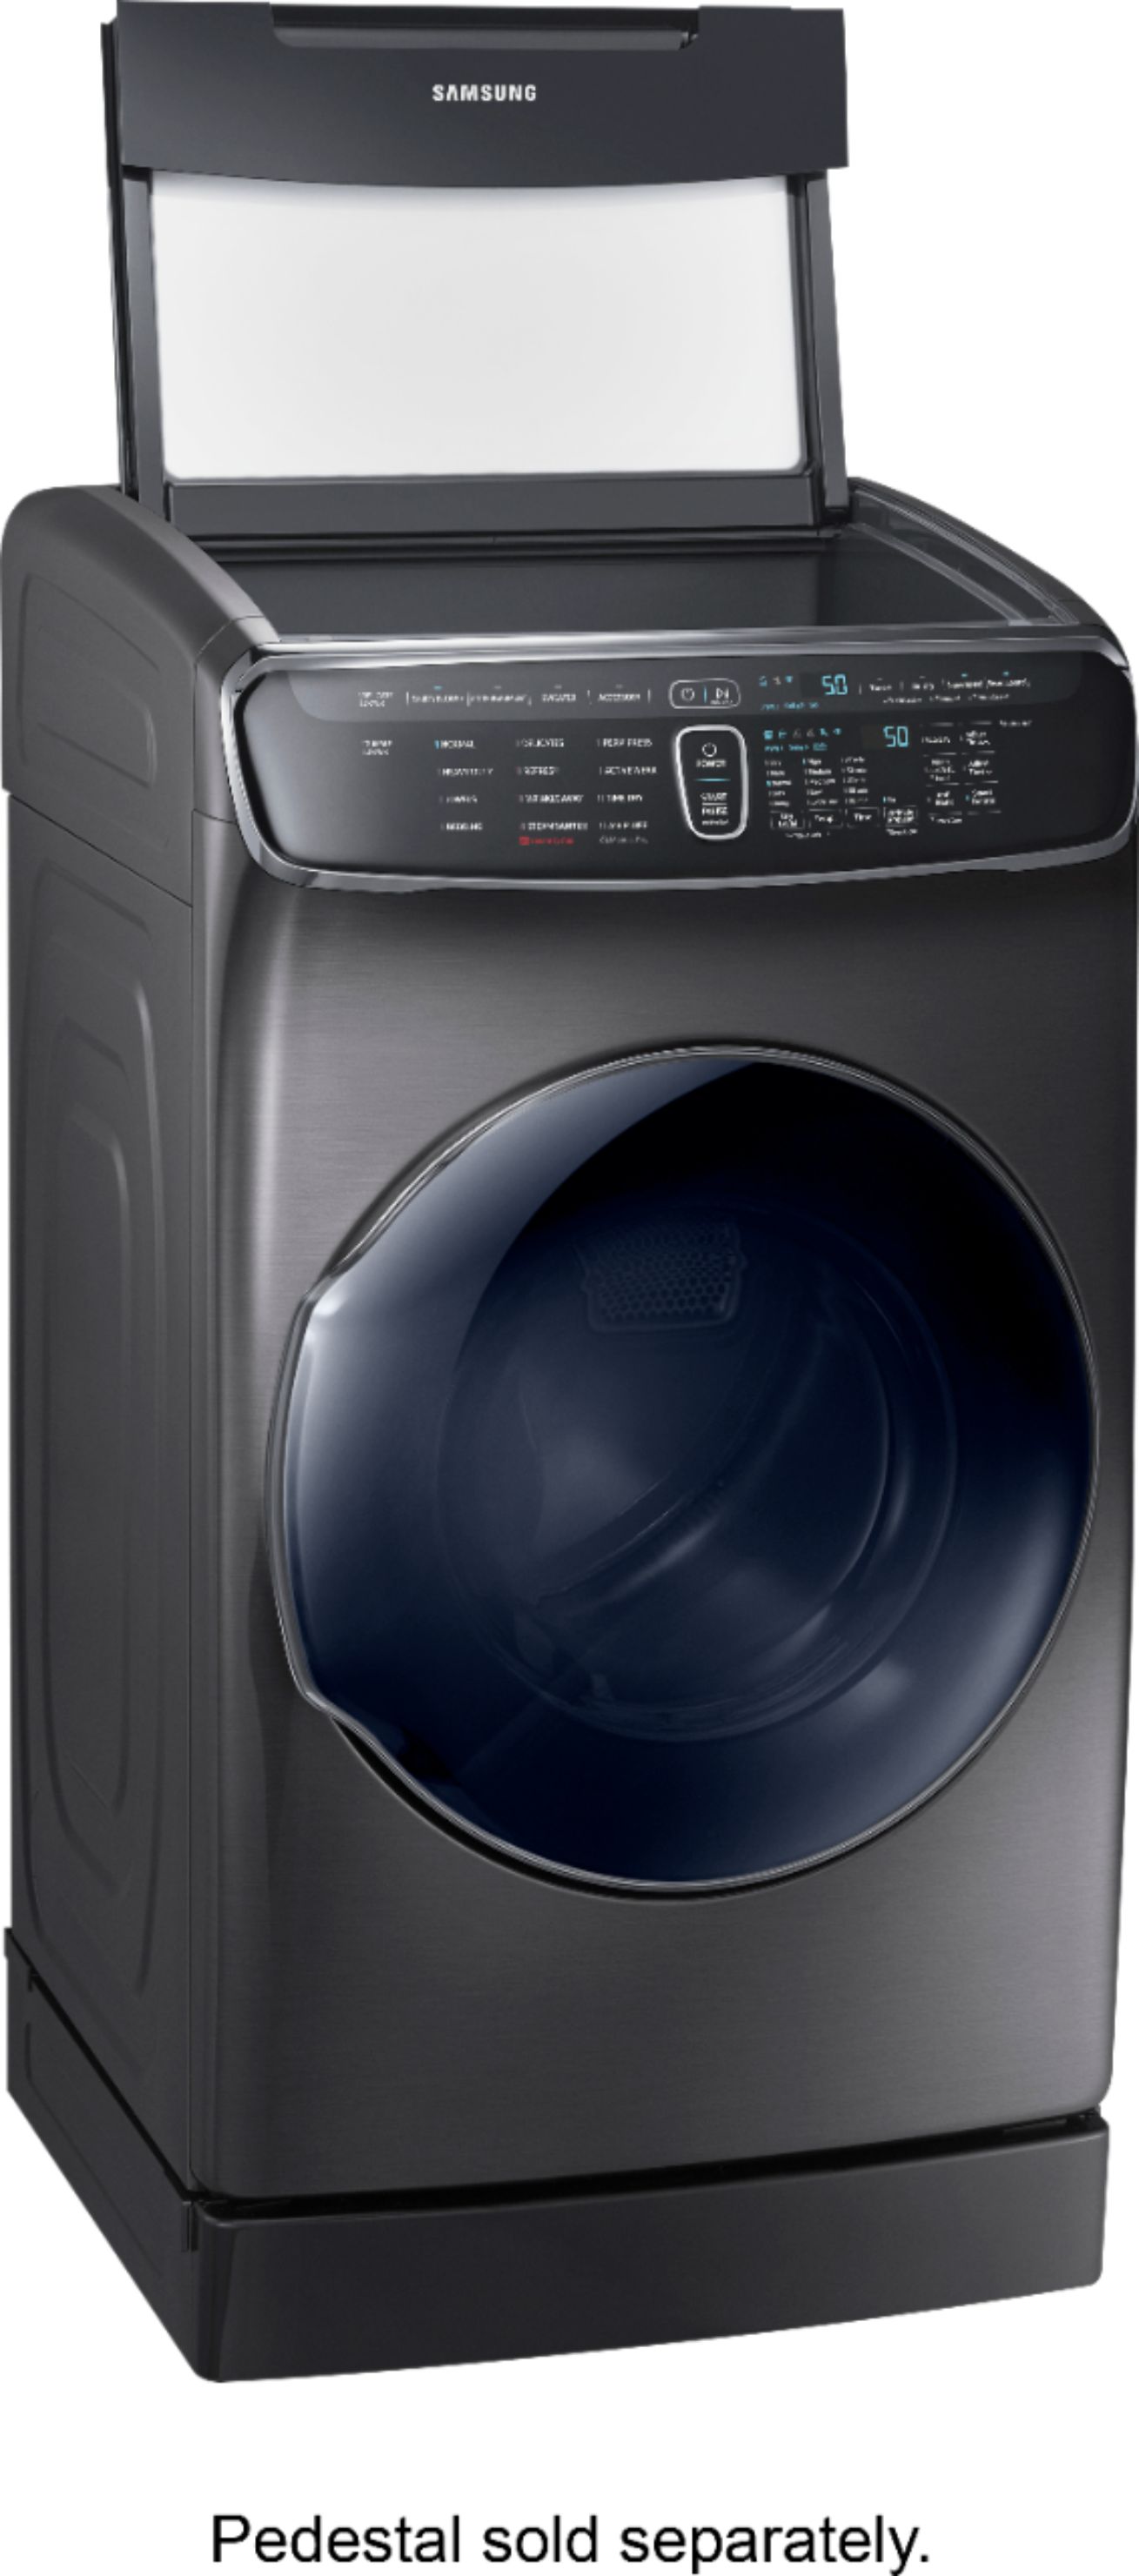 Angle View: Samsung - 7.5 Cu. Ft. Gas Dryer with Steam and FlexDry - Black stainless steel